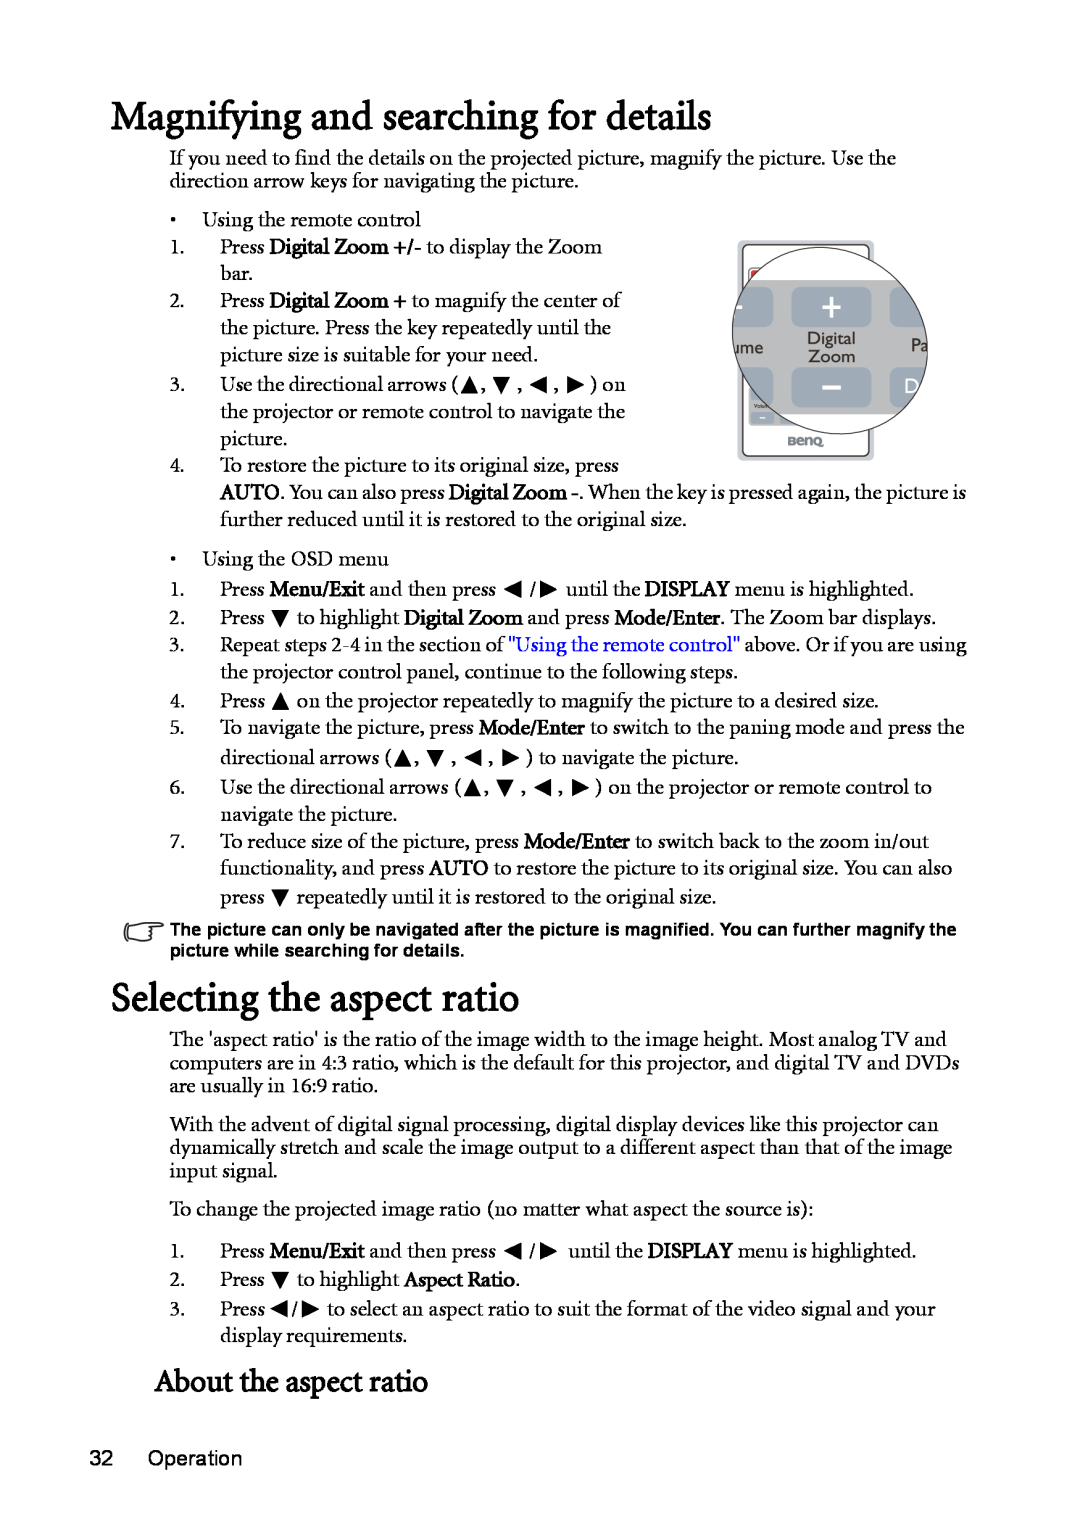 BenQ MP625P user manual Magnifying and searching for details, Selecting the aspect ratio, About the aspect ratio 